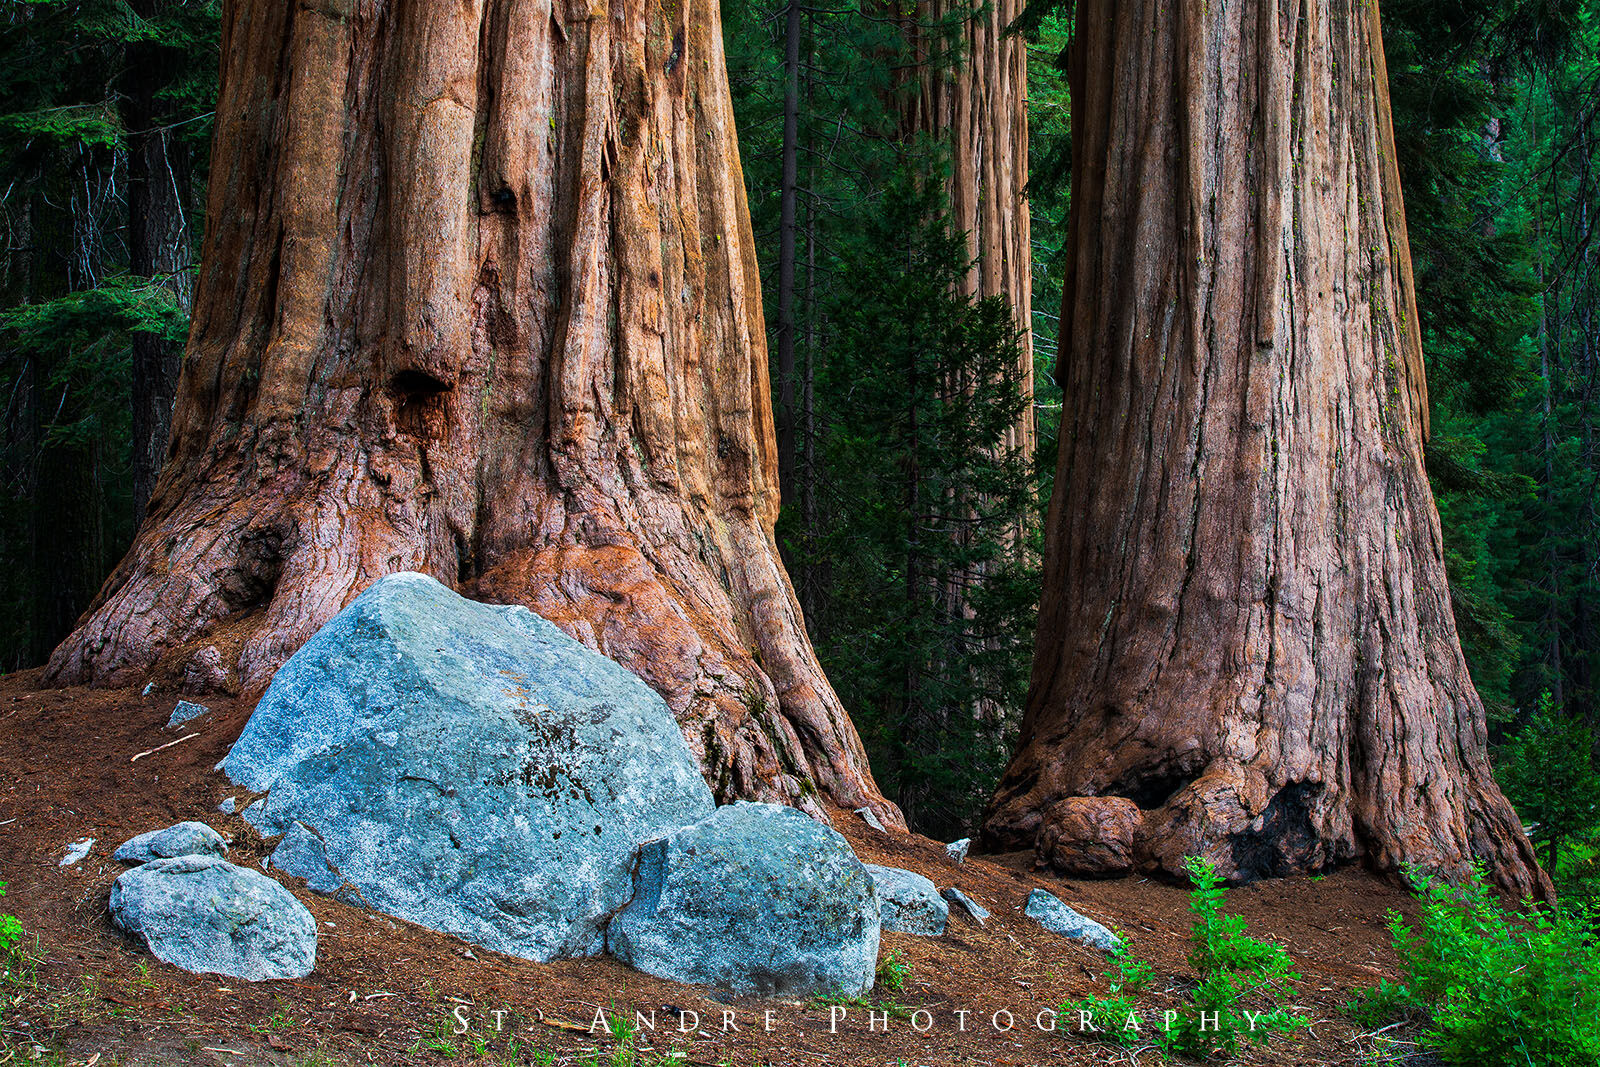 Three huge sequoia trees late in the day with a large boulder in the foreground. 